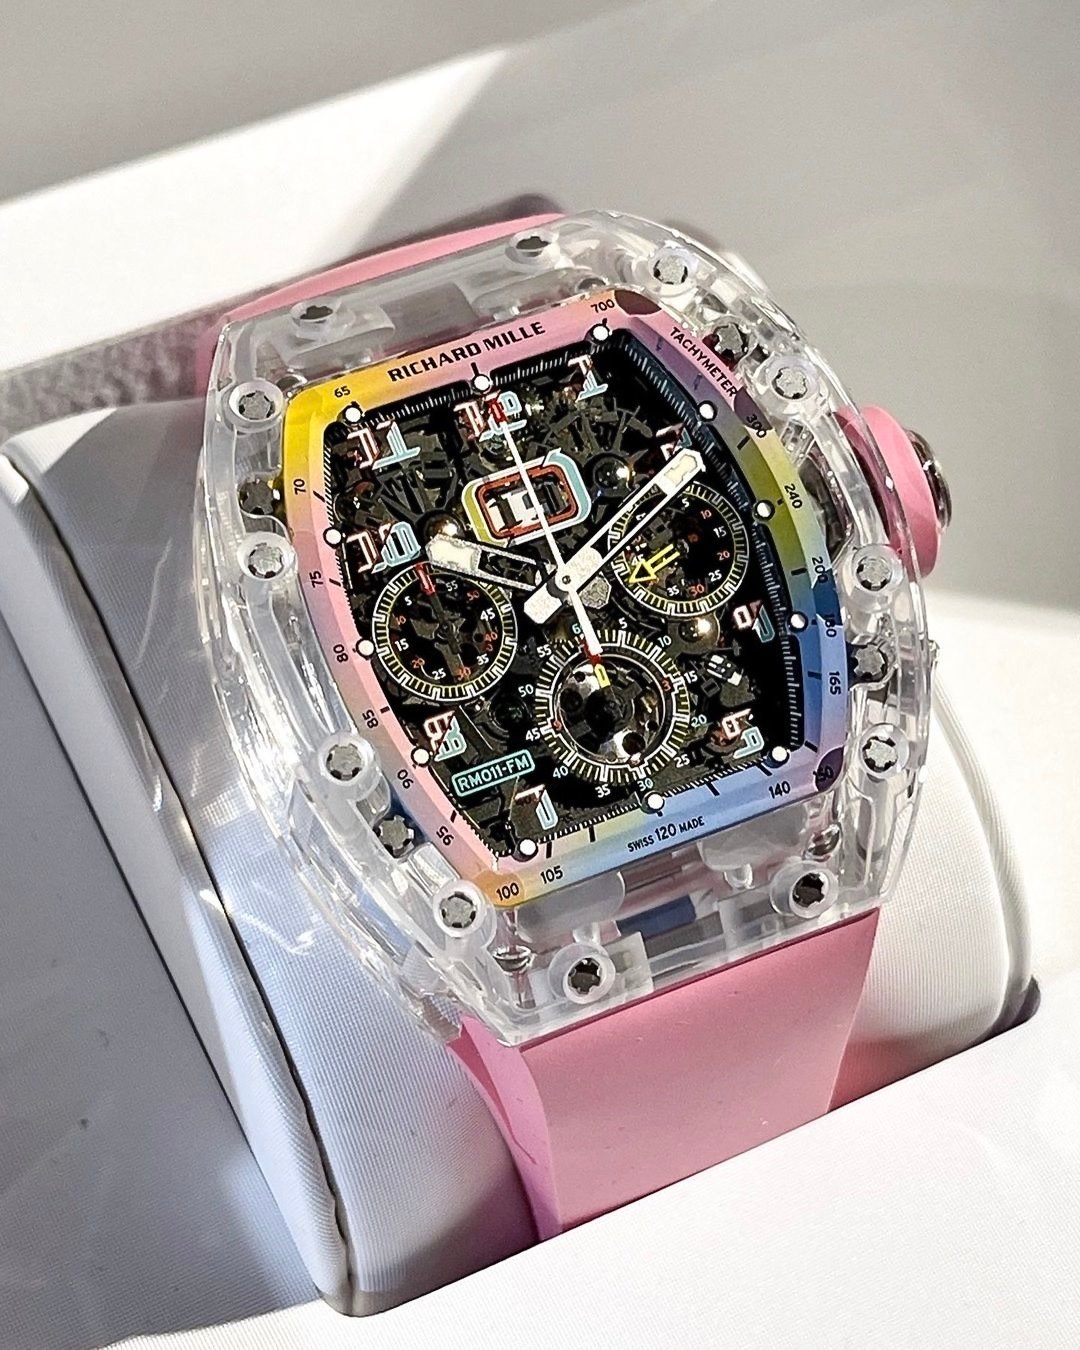 Aet Remould Richard Mille Sapphire Rm 011 Watch In Hong Kong For Sale ...